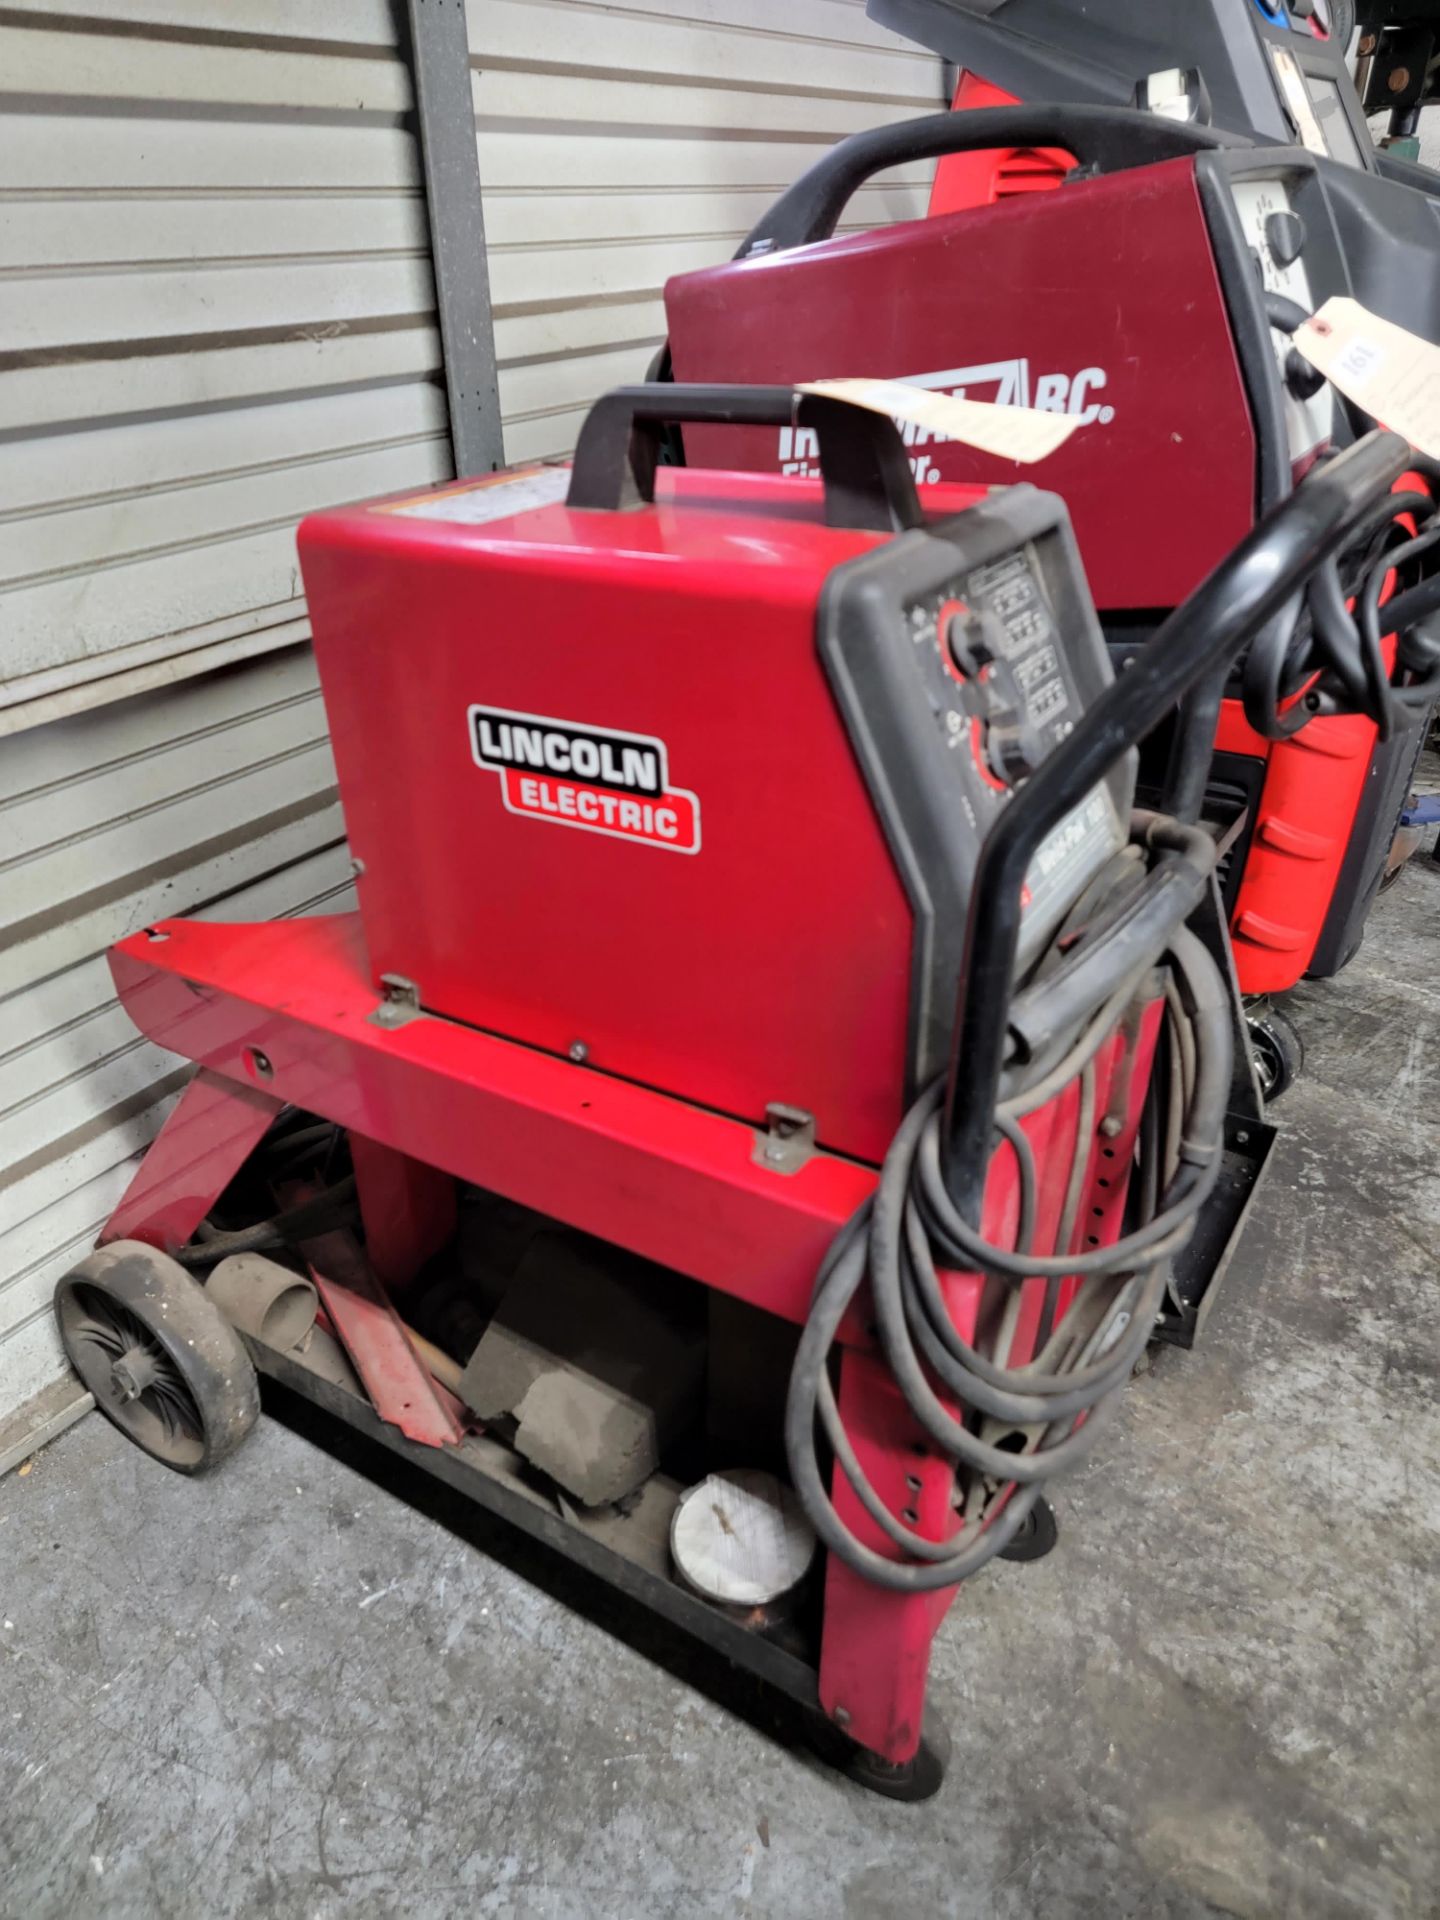 LINCOLN ELECTRIC WELD PAK 100 ARC WELDER - Image 2 of 3